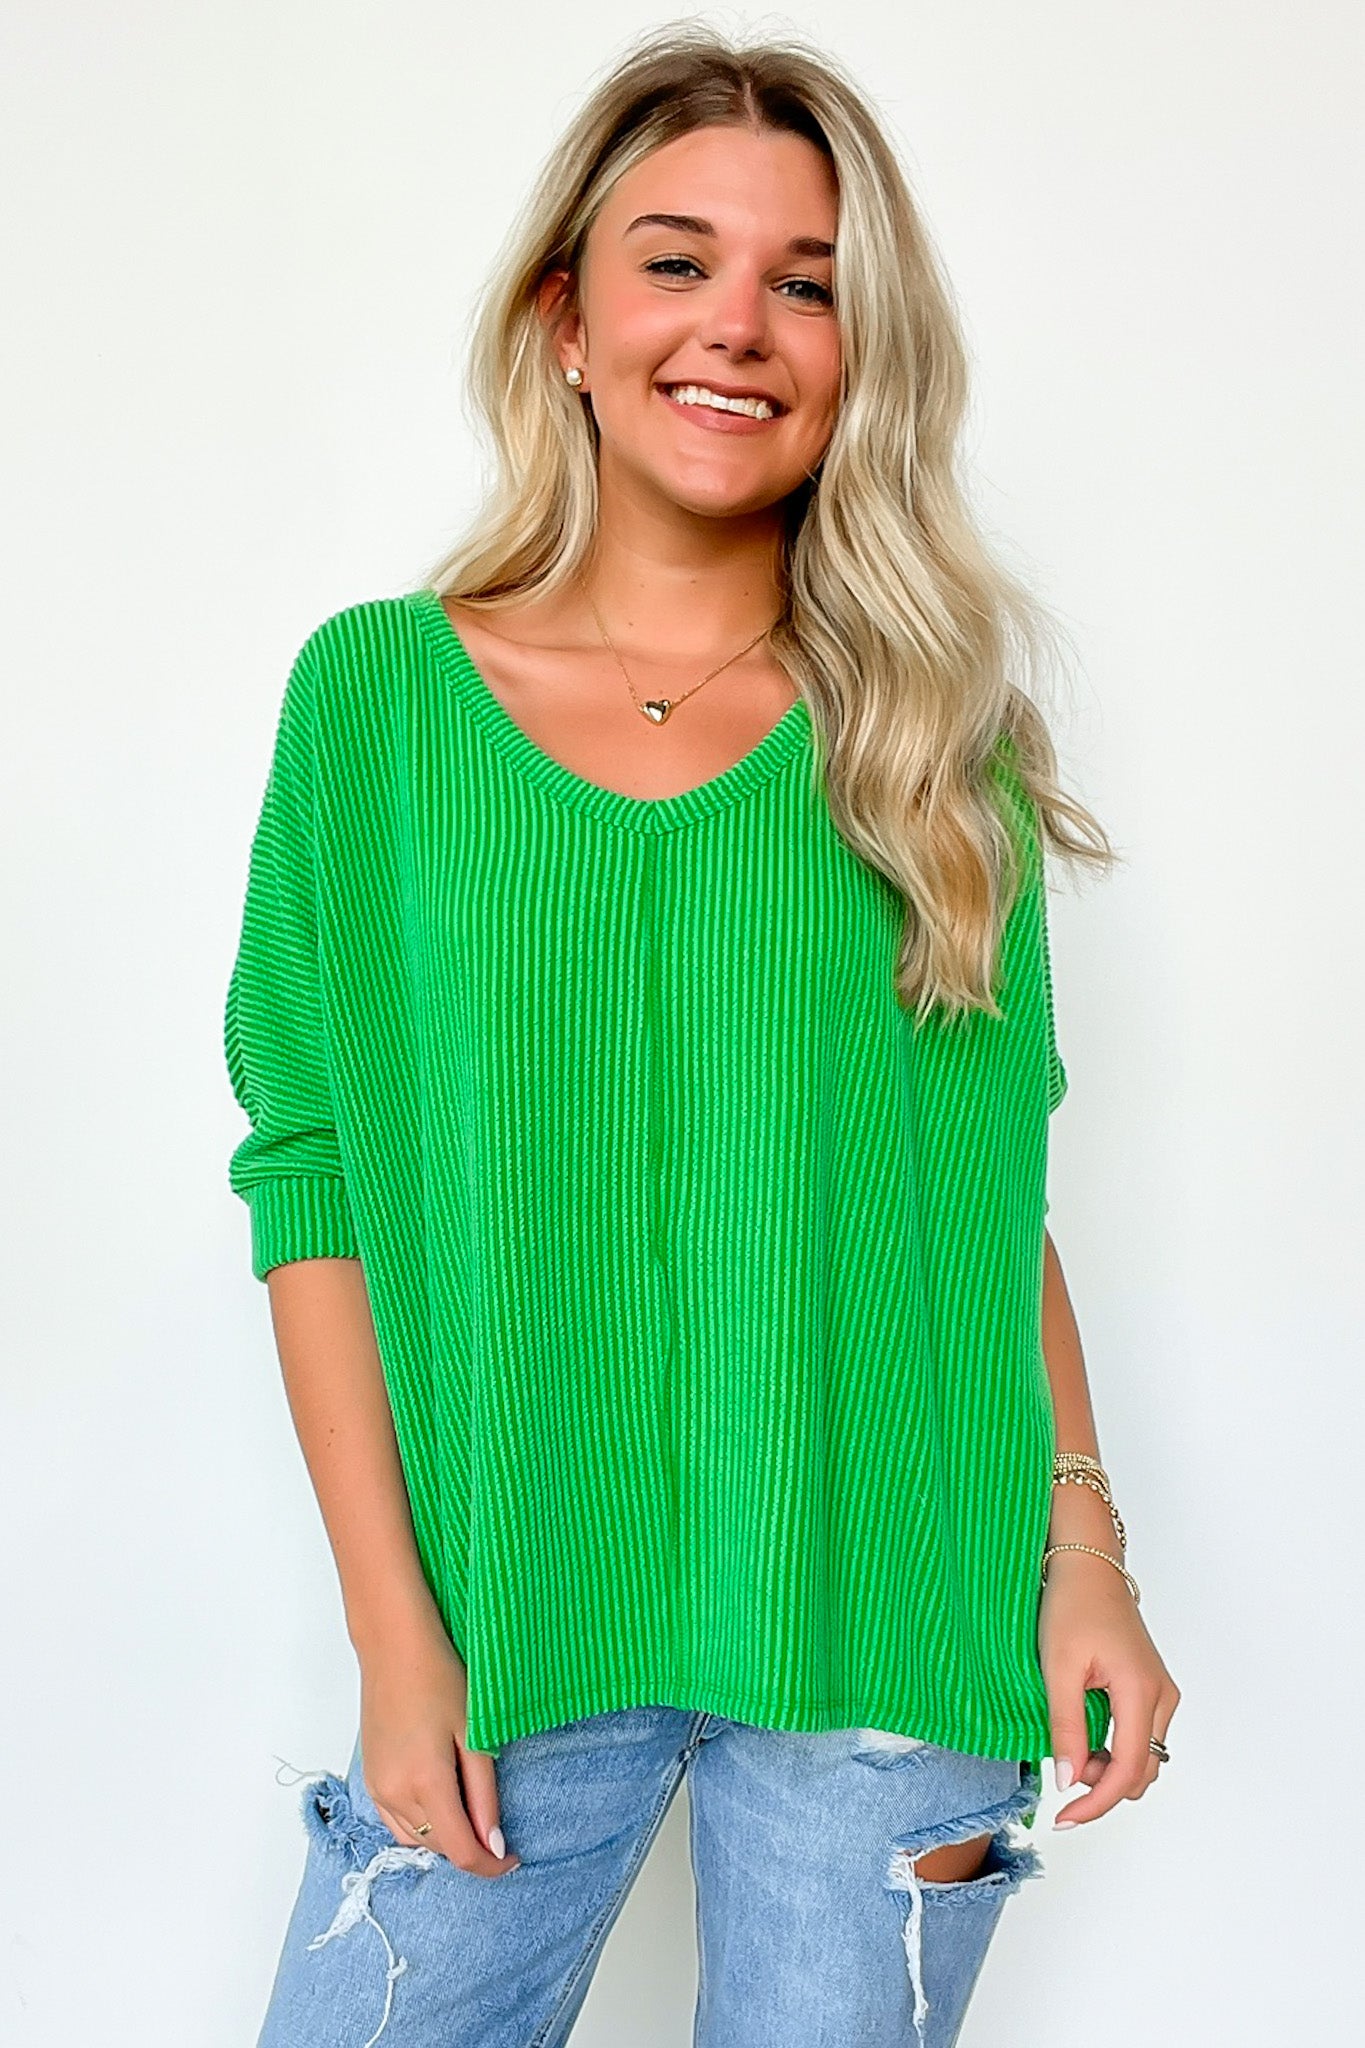 Kelly Green / SM Rhysa Textured Knit V-Neck Top - BACK IN STOCK - Madison and Mallory